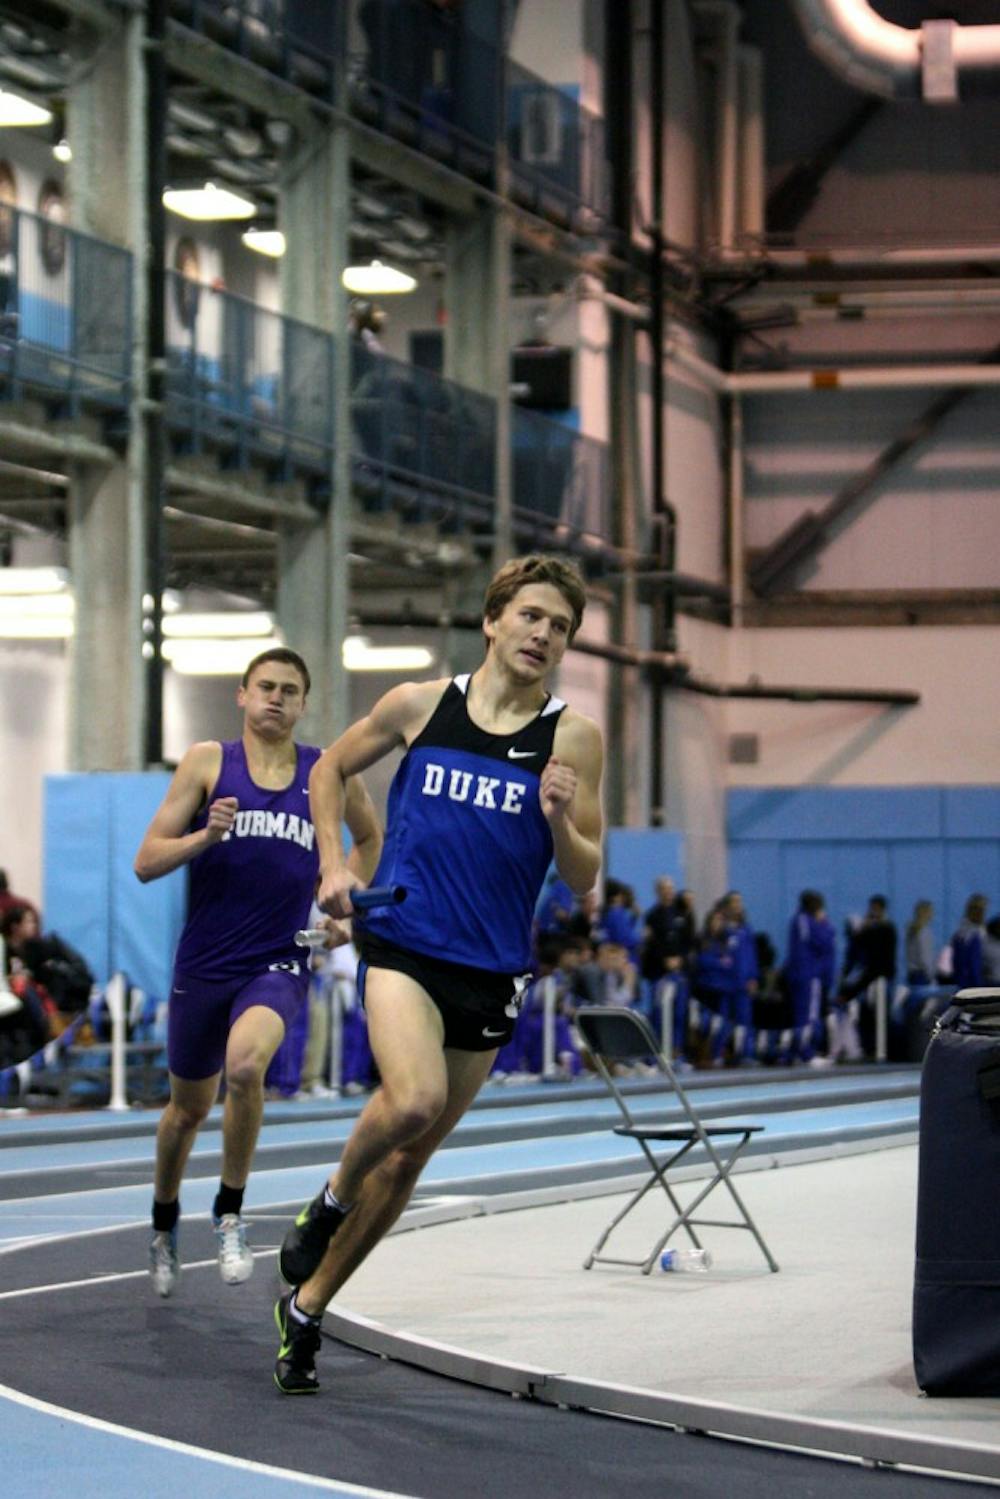 Nate McClafferty and the Duke distance medley relay team finished fifth with a time of 9:52.96 at the Millrose Games.